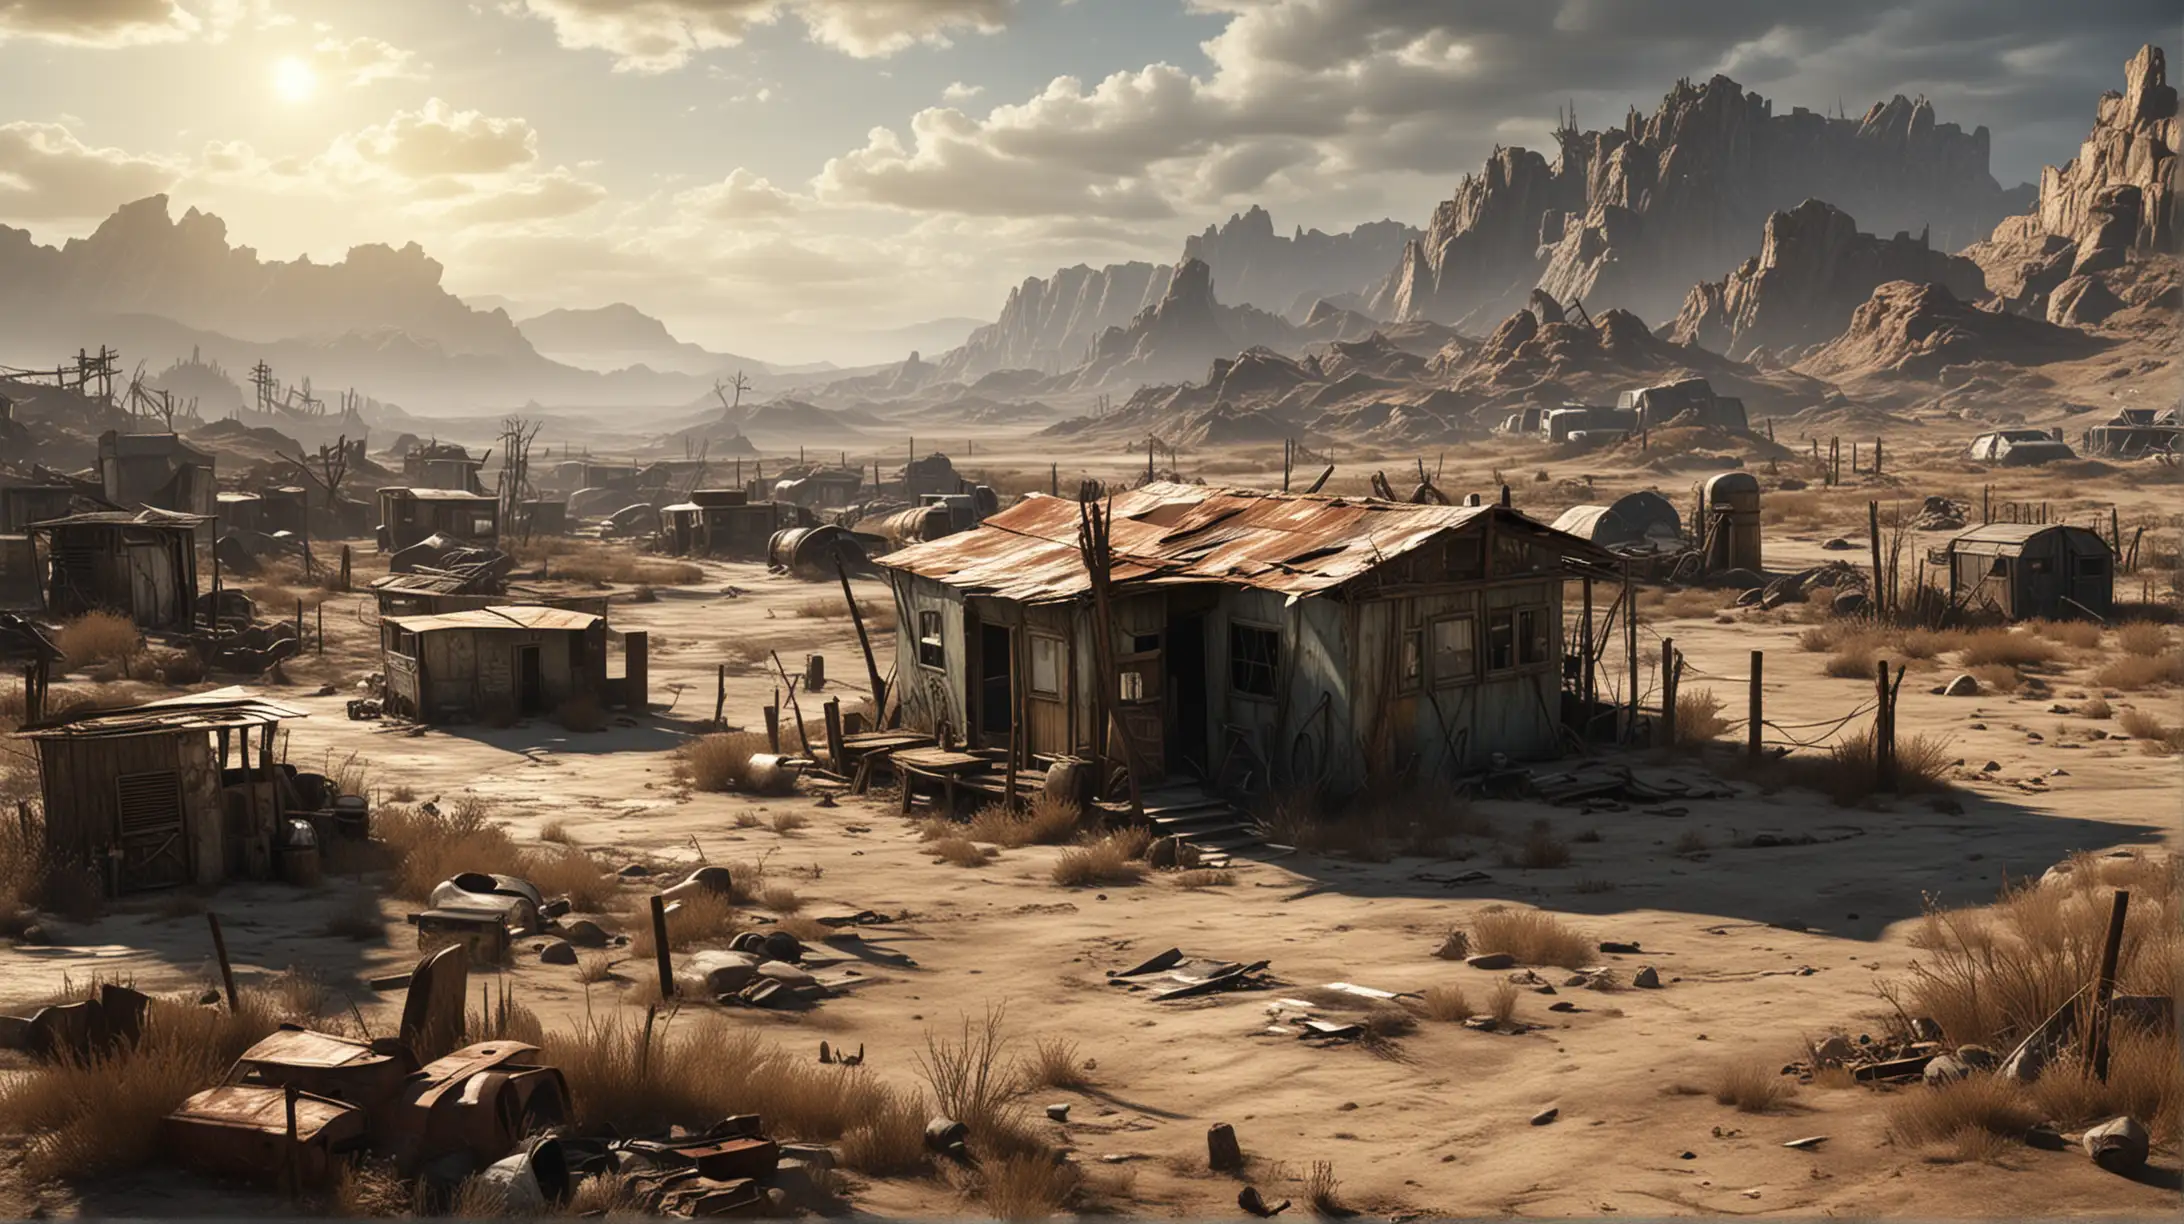 fallout-inspired wasteland with only one ramshackle shack in an empty land